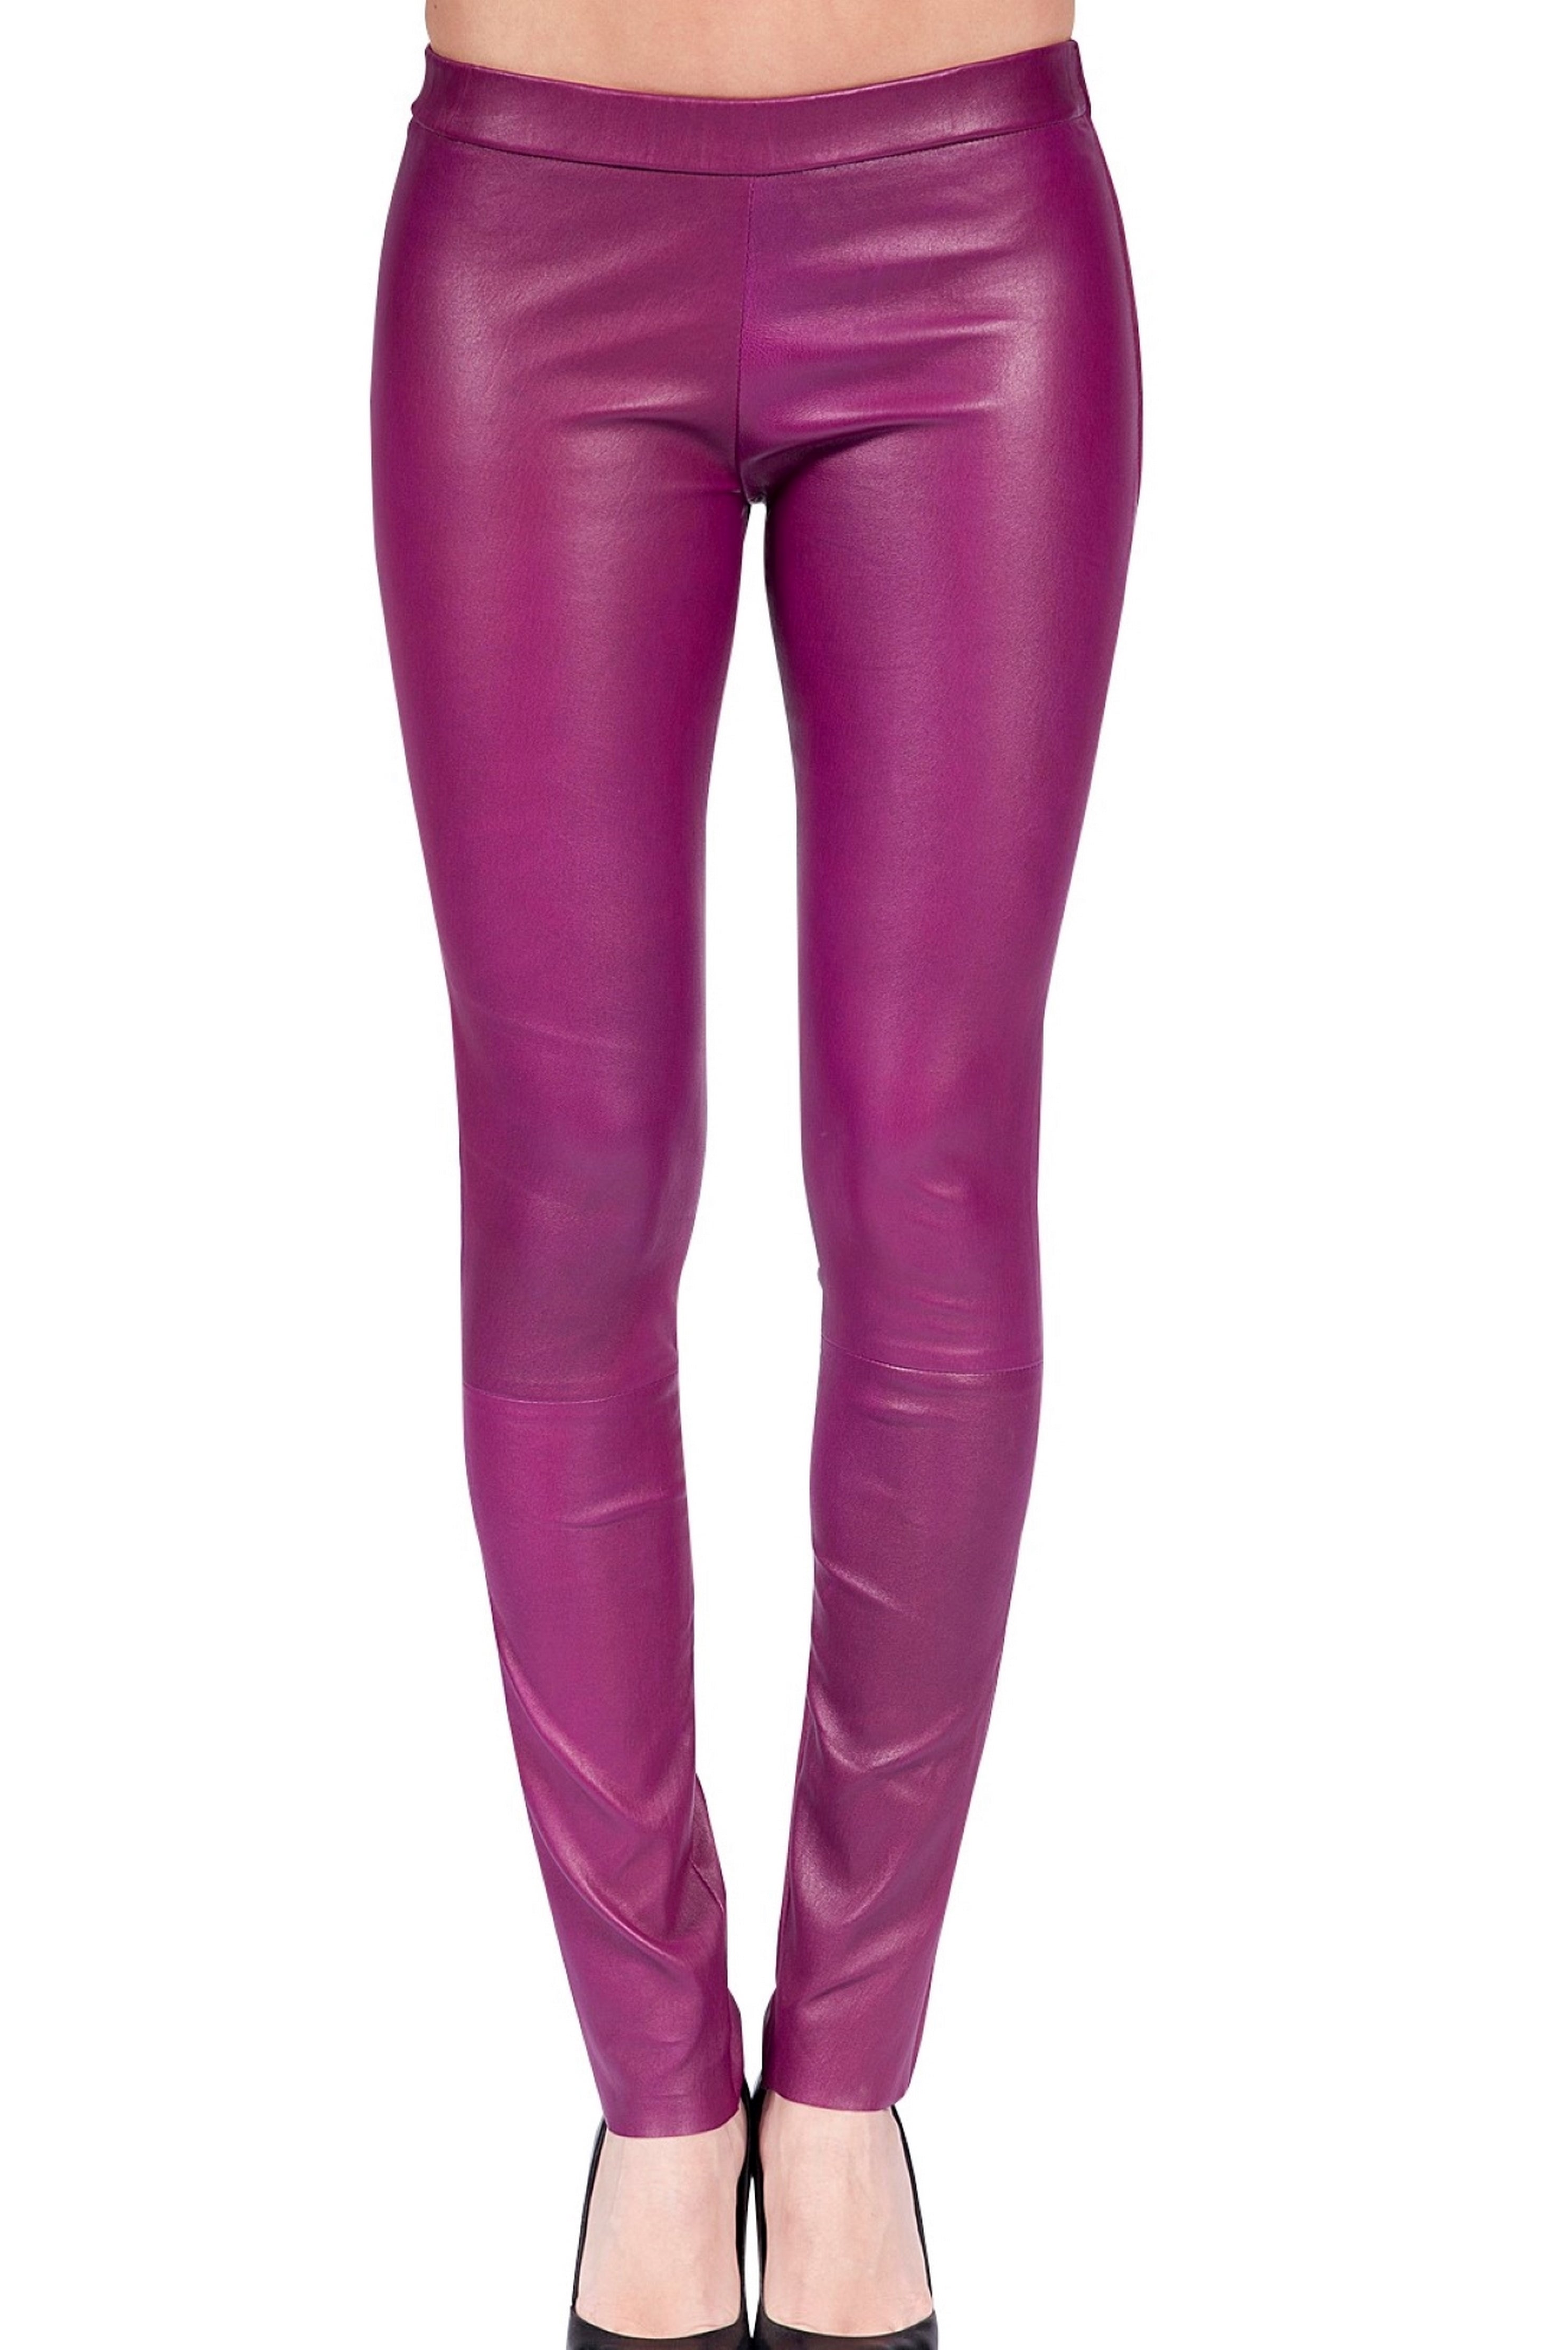 Wholesale women's leggings by top quality brands